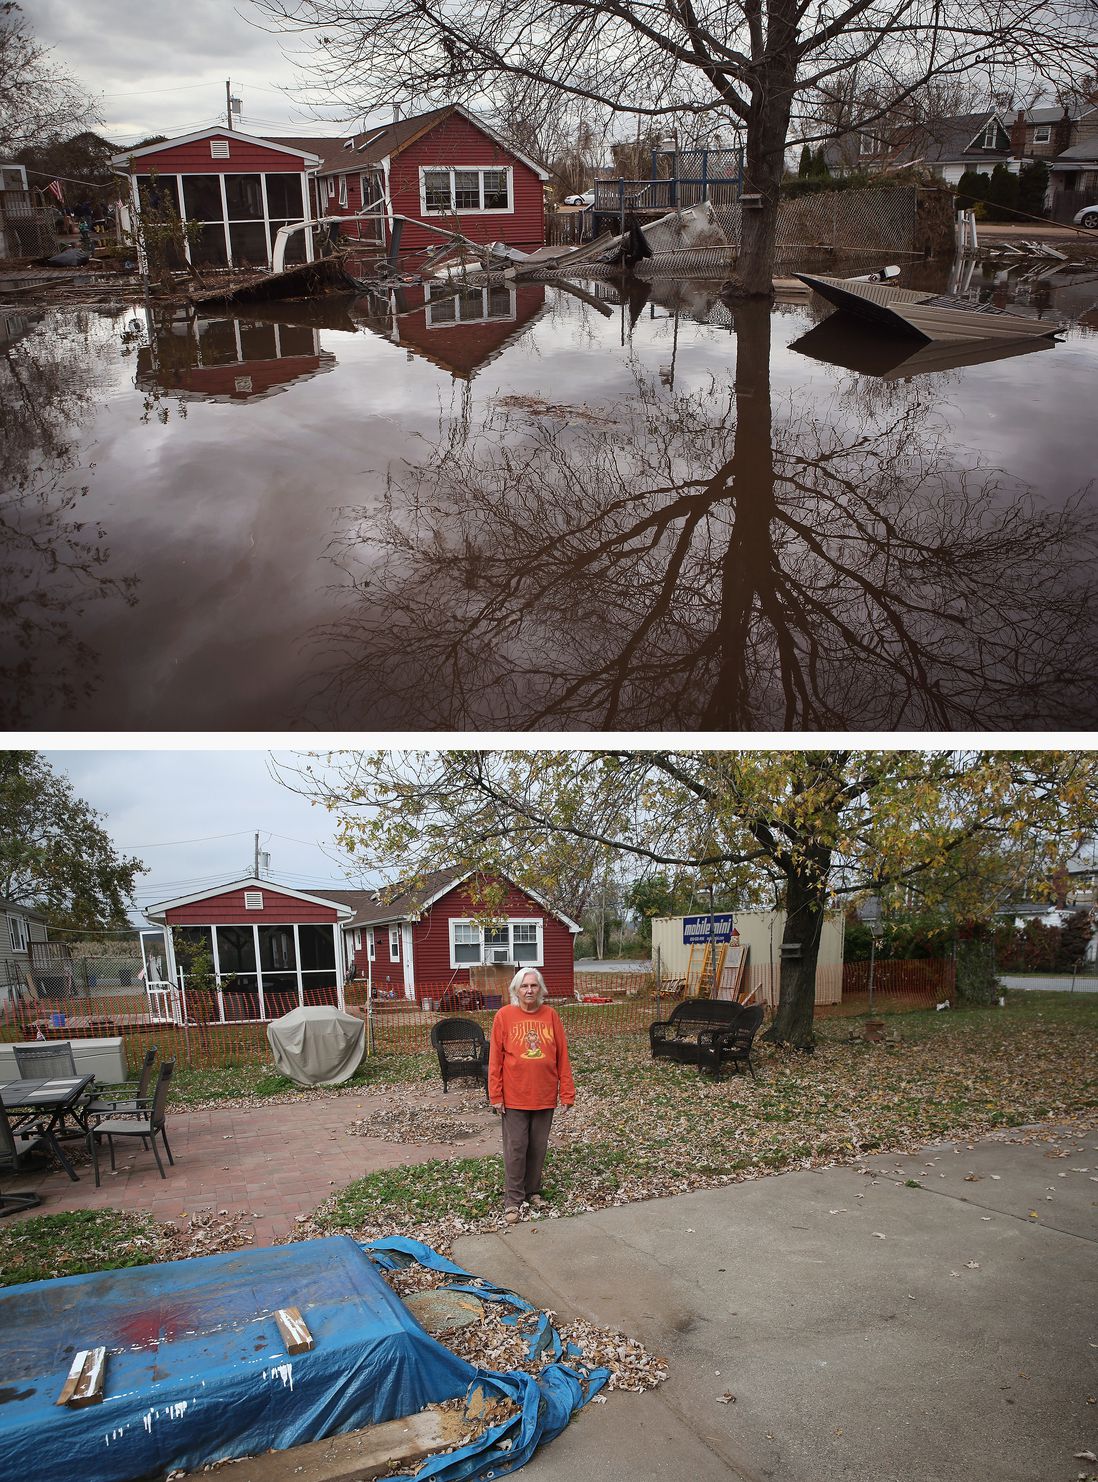 [Top] Water continues to flood a neighborhood on November 1, 2012 in the Ocean Breeze area of the Staten Island borough of New York City. [Bottom] Janet Hague stands in her back yard on October 17, 2013.